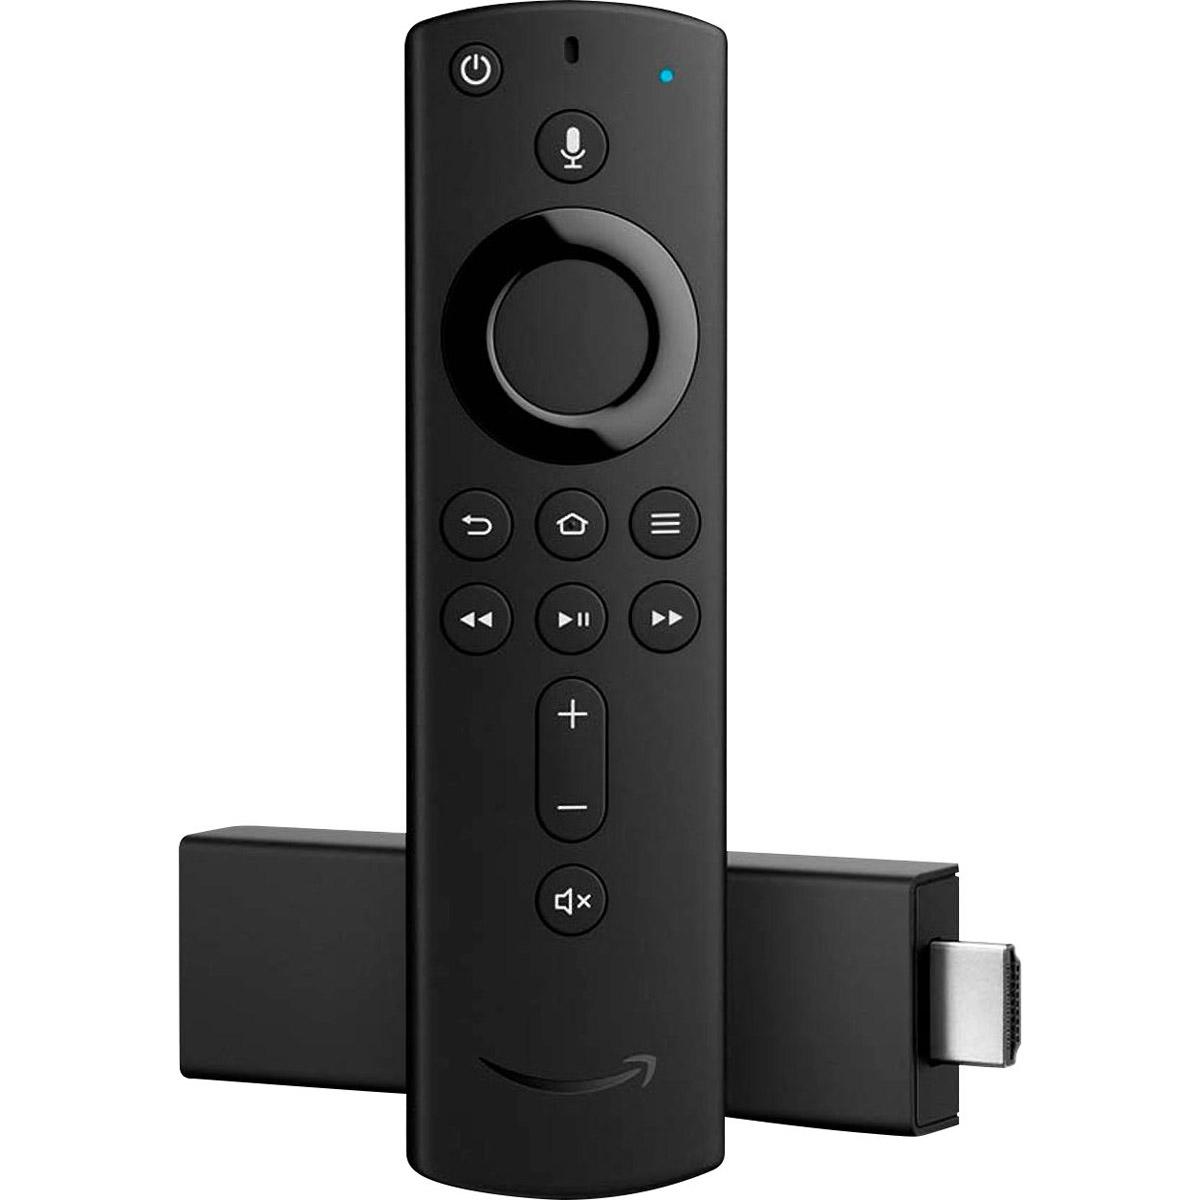 Amazon Fire TV Stick for $15.99